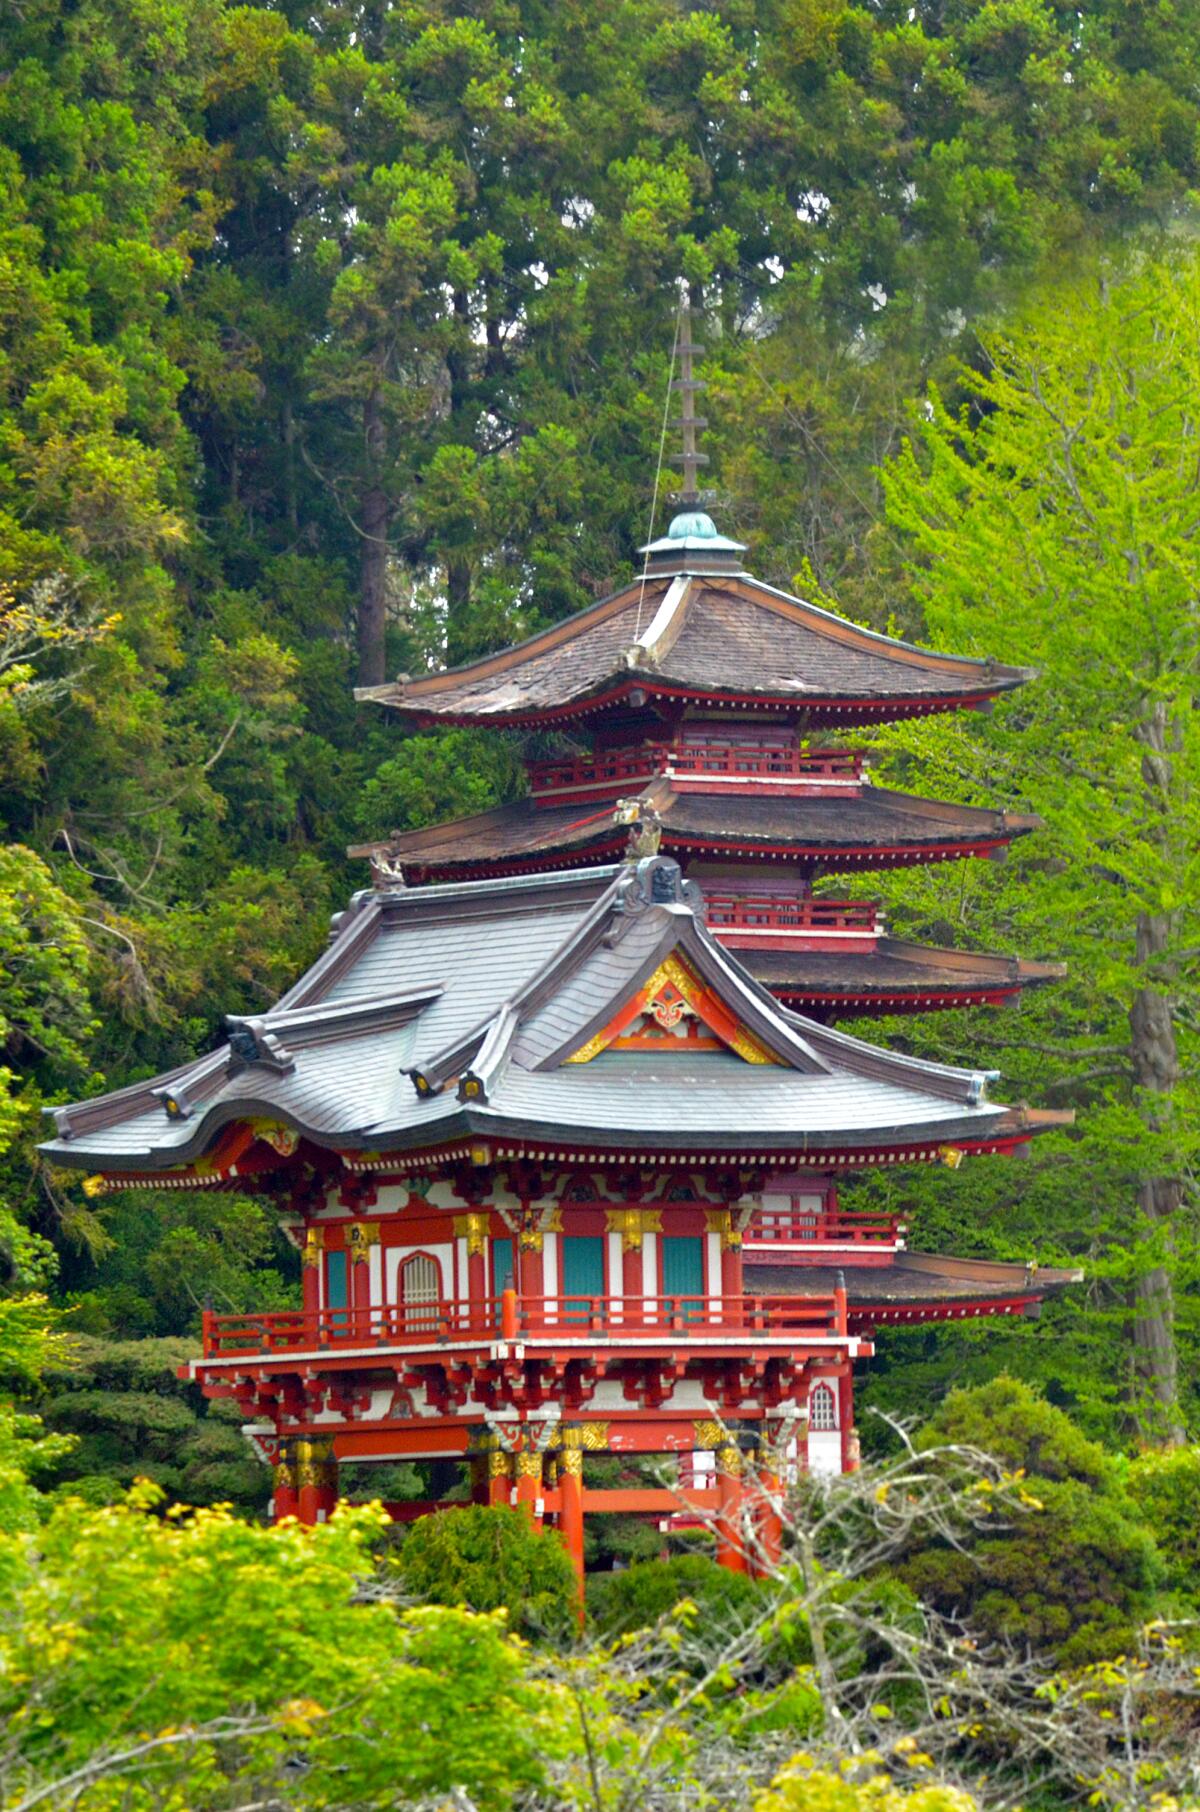 A colorful Japanese pagoda is seen at Golden Gate Park.